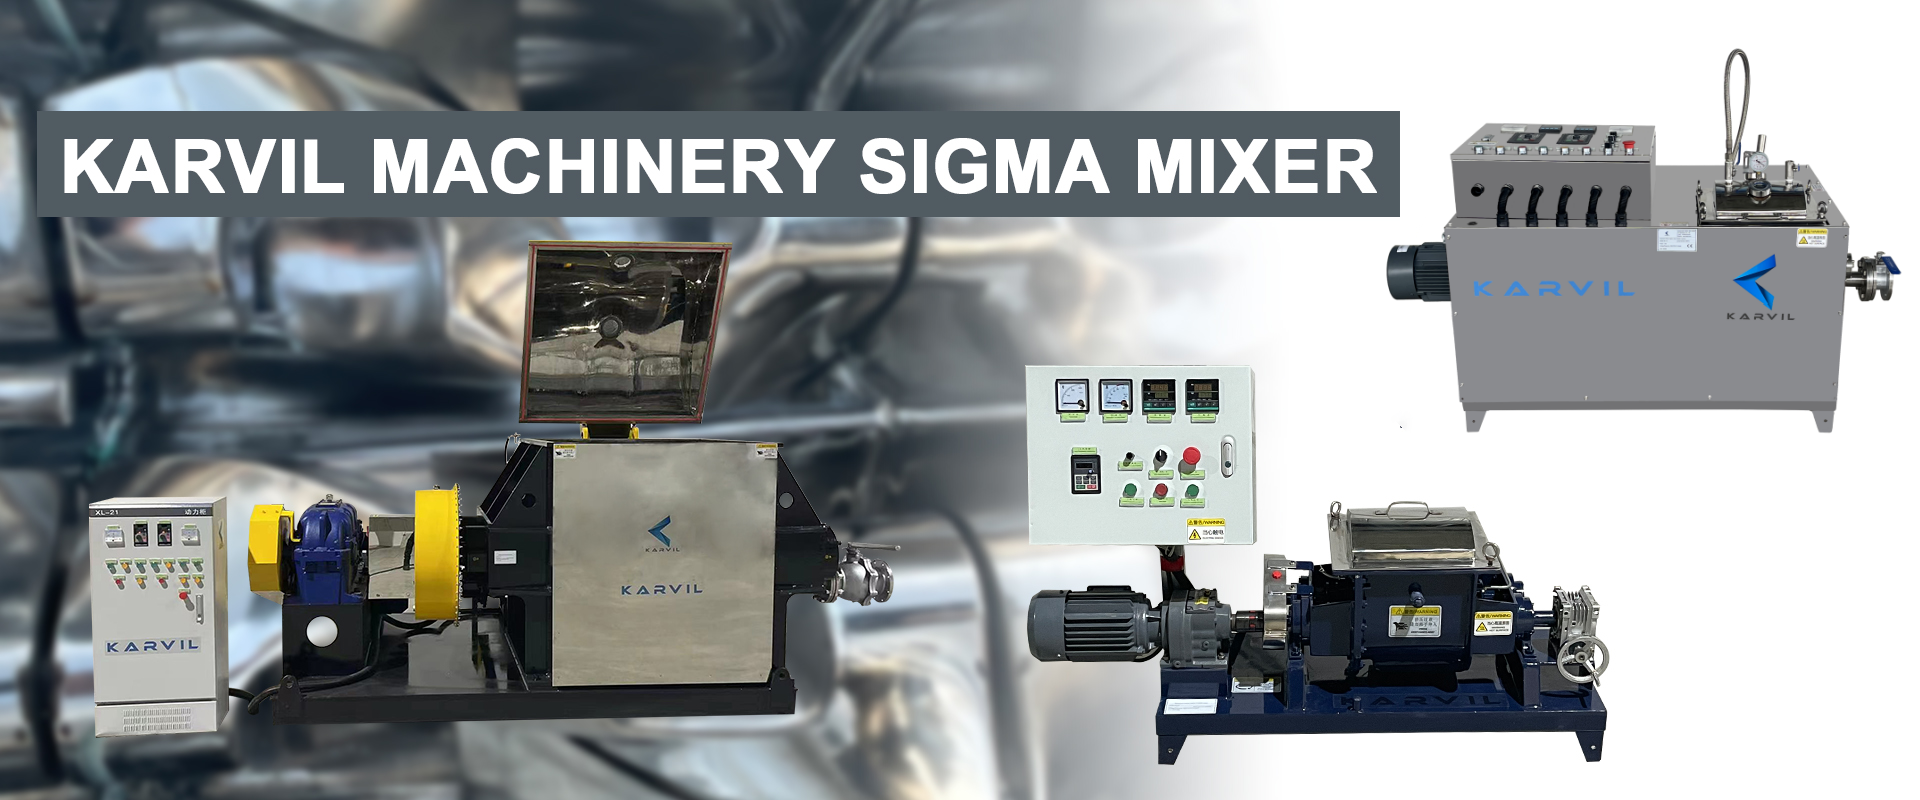 What is a Sigma Mixer?